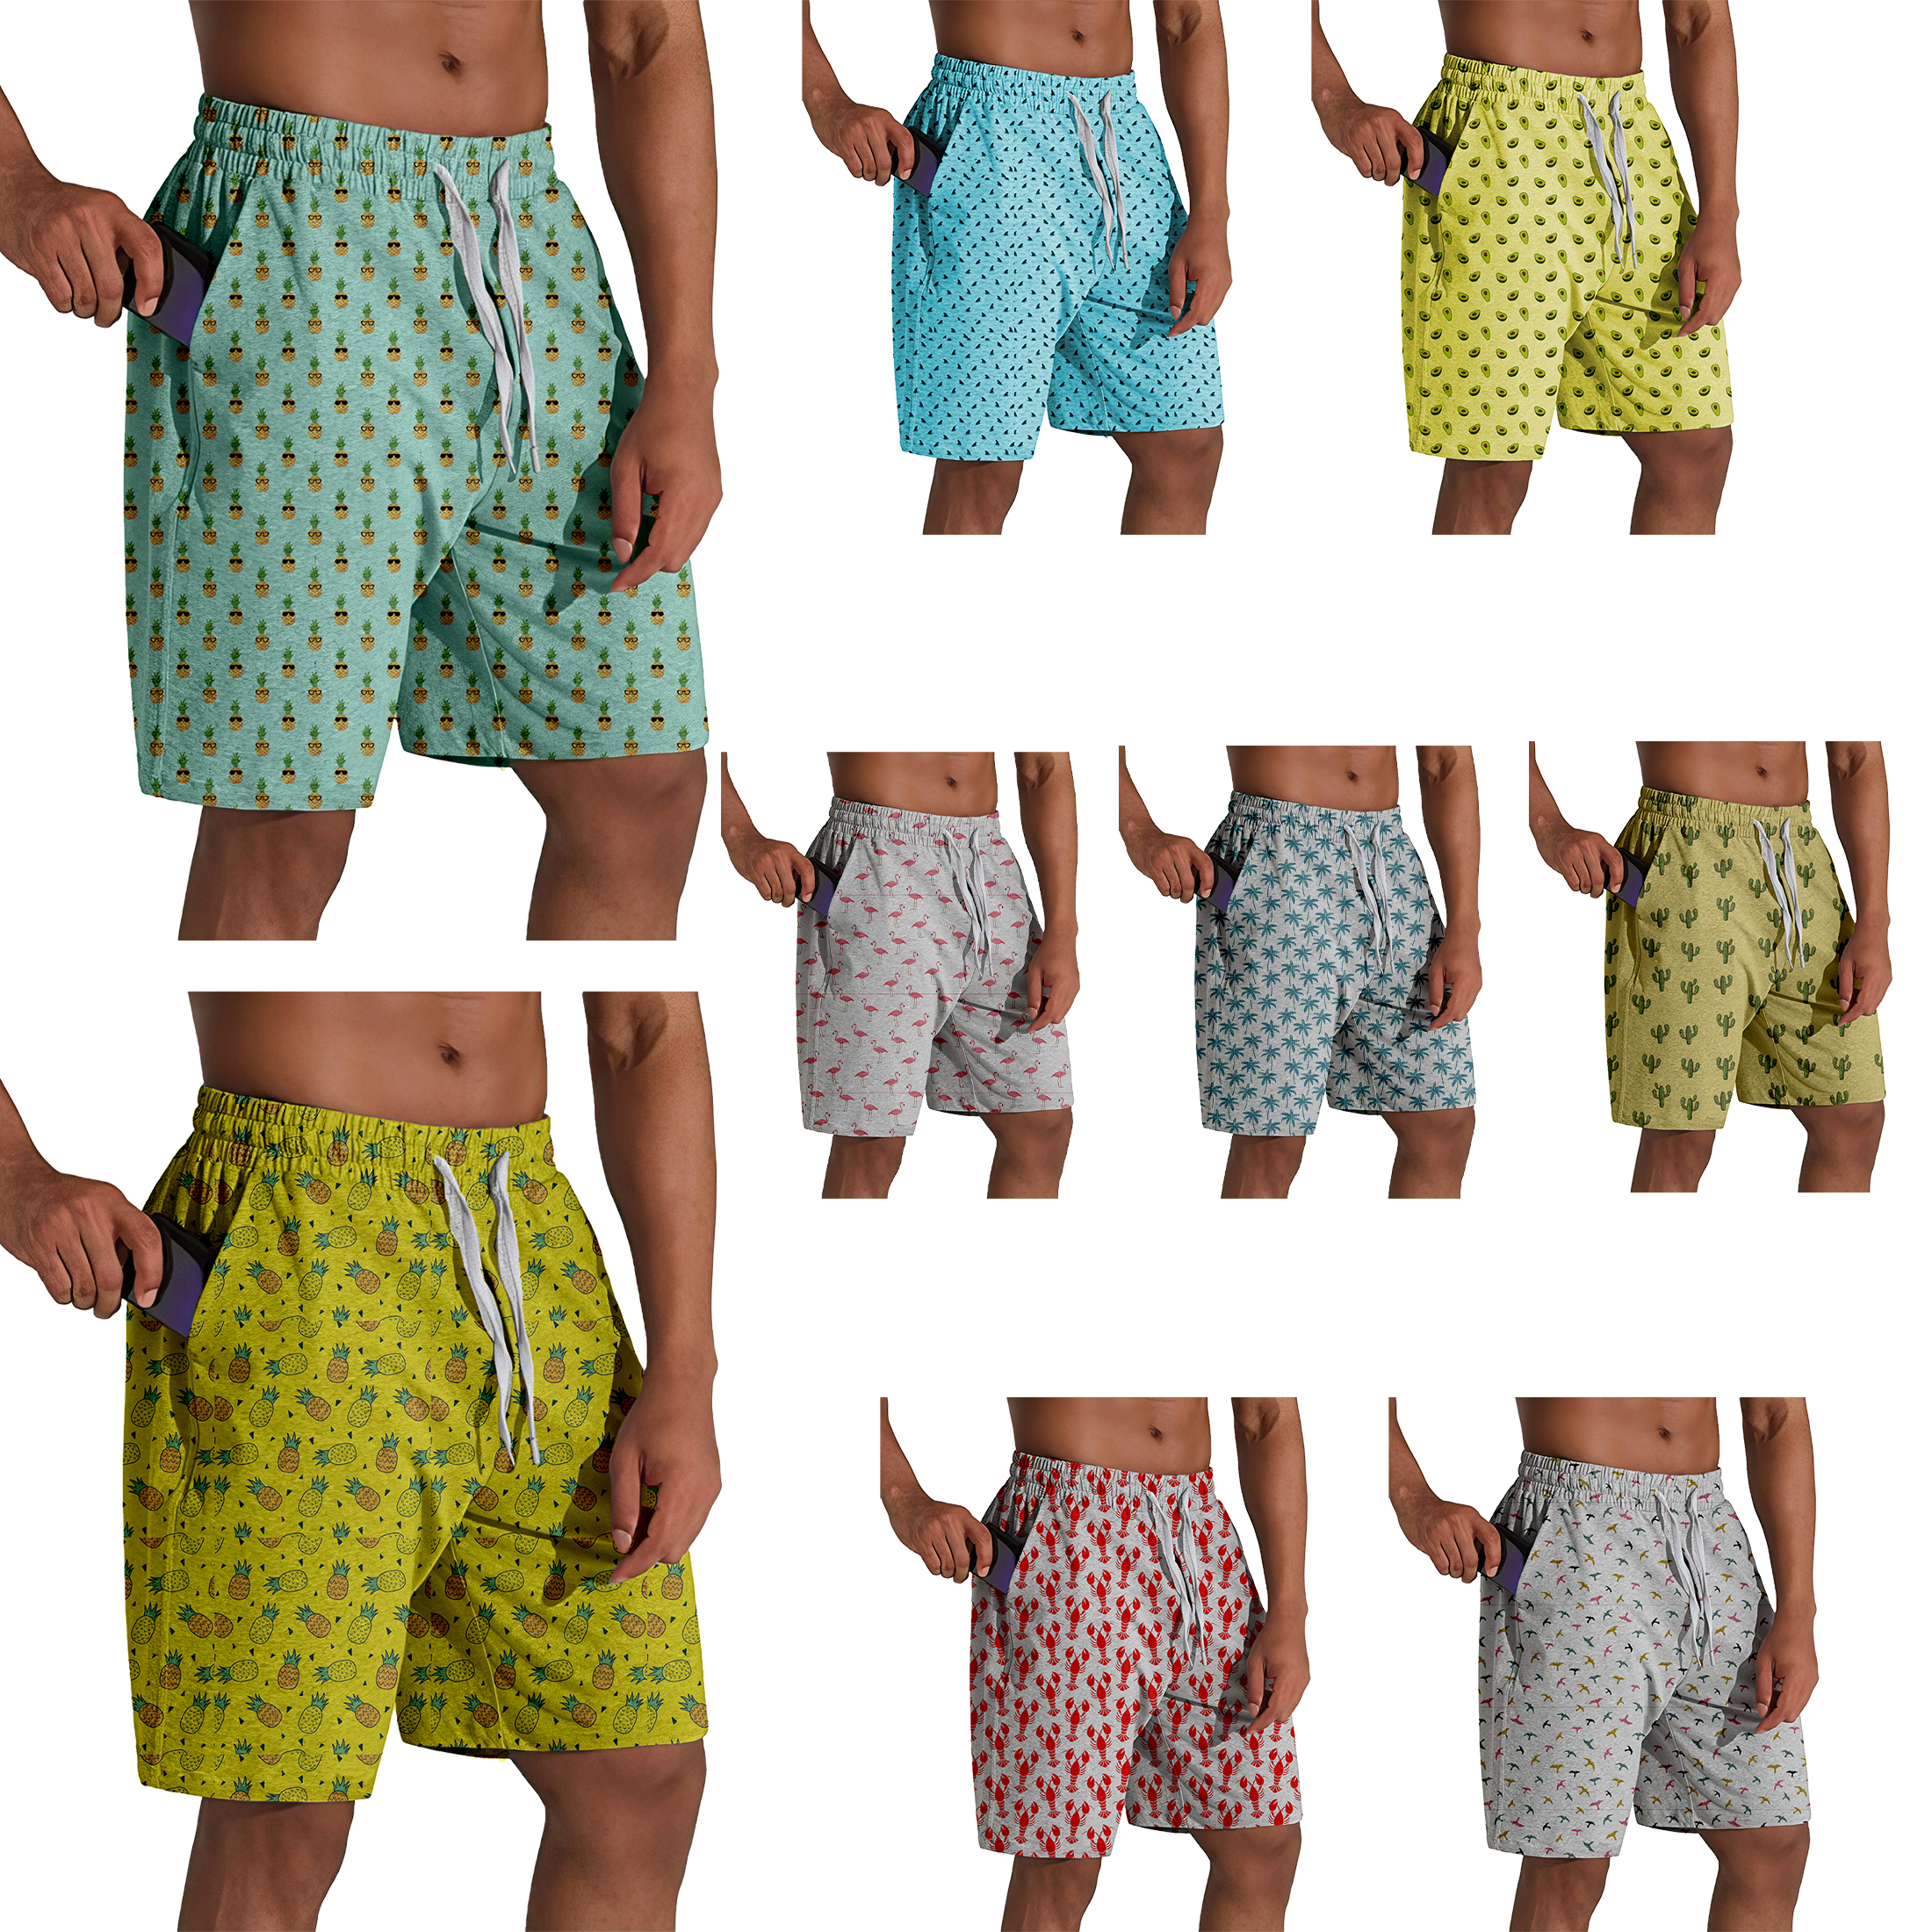 3-Pk Men's Terry Knit Lounge Shorts Soft Printed Athletic Sweat Shorts Casual Workout Gym Running Summer Bottoms Elastic Waistband & Pockets